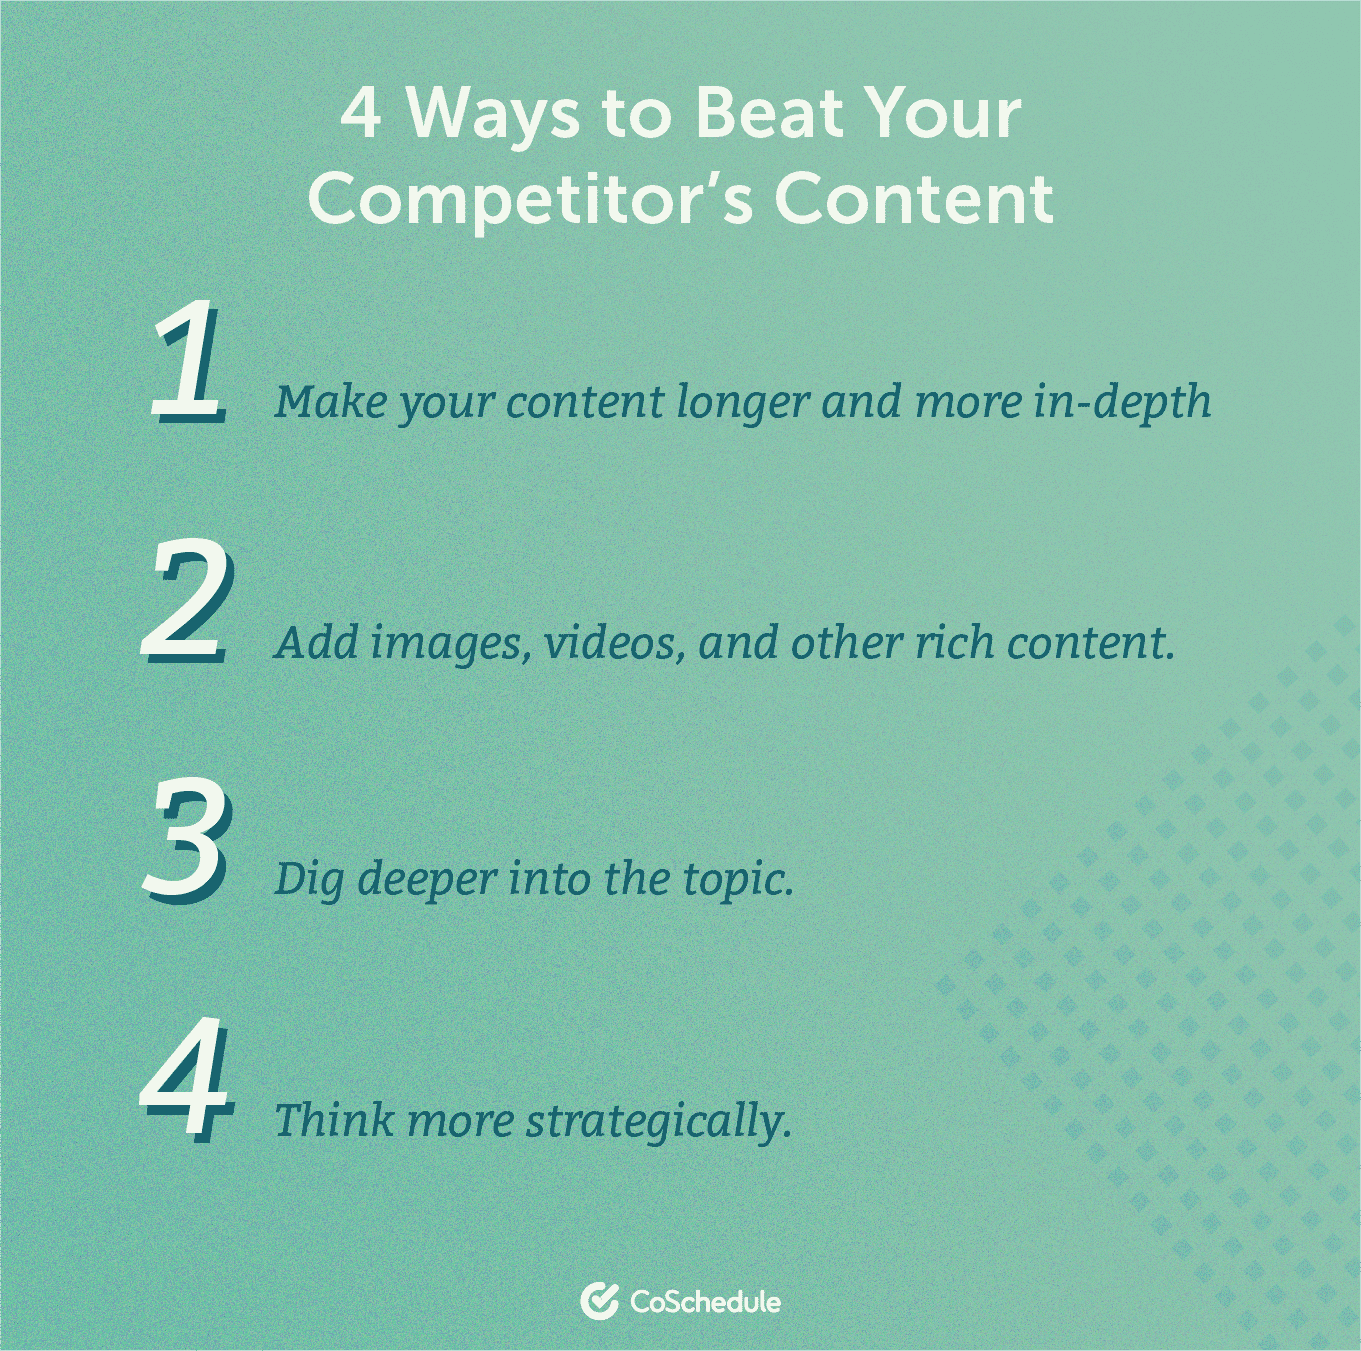 List of 4 things you can do to beat your competitor's content